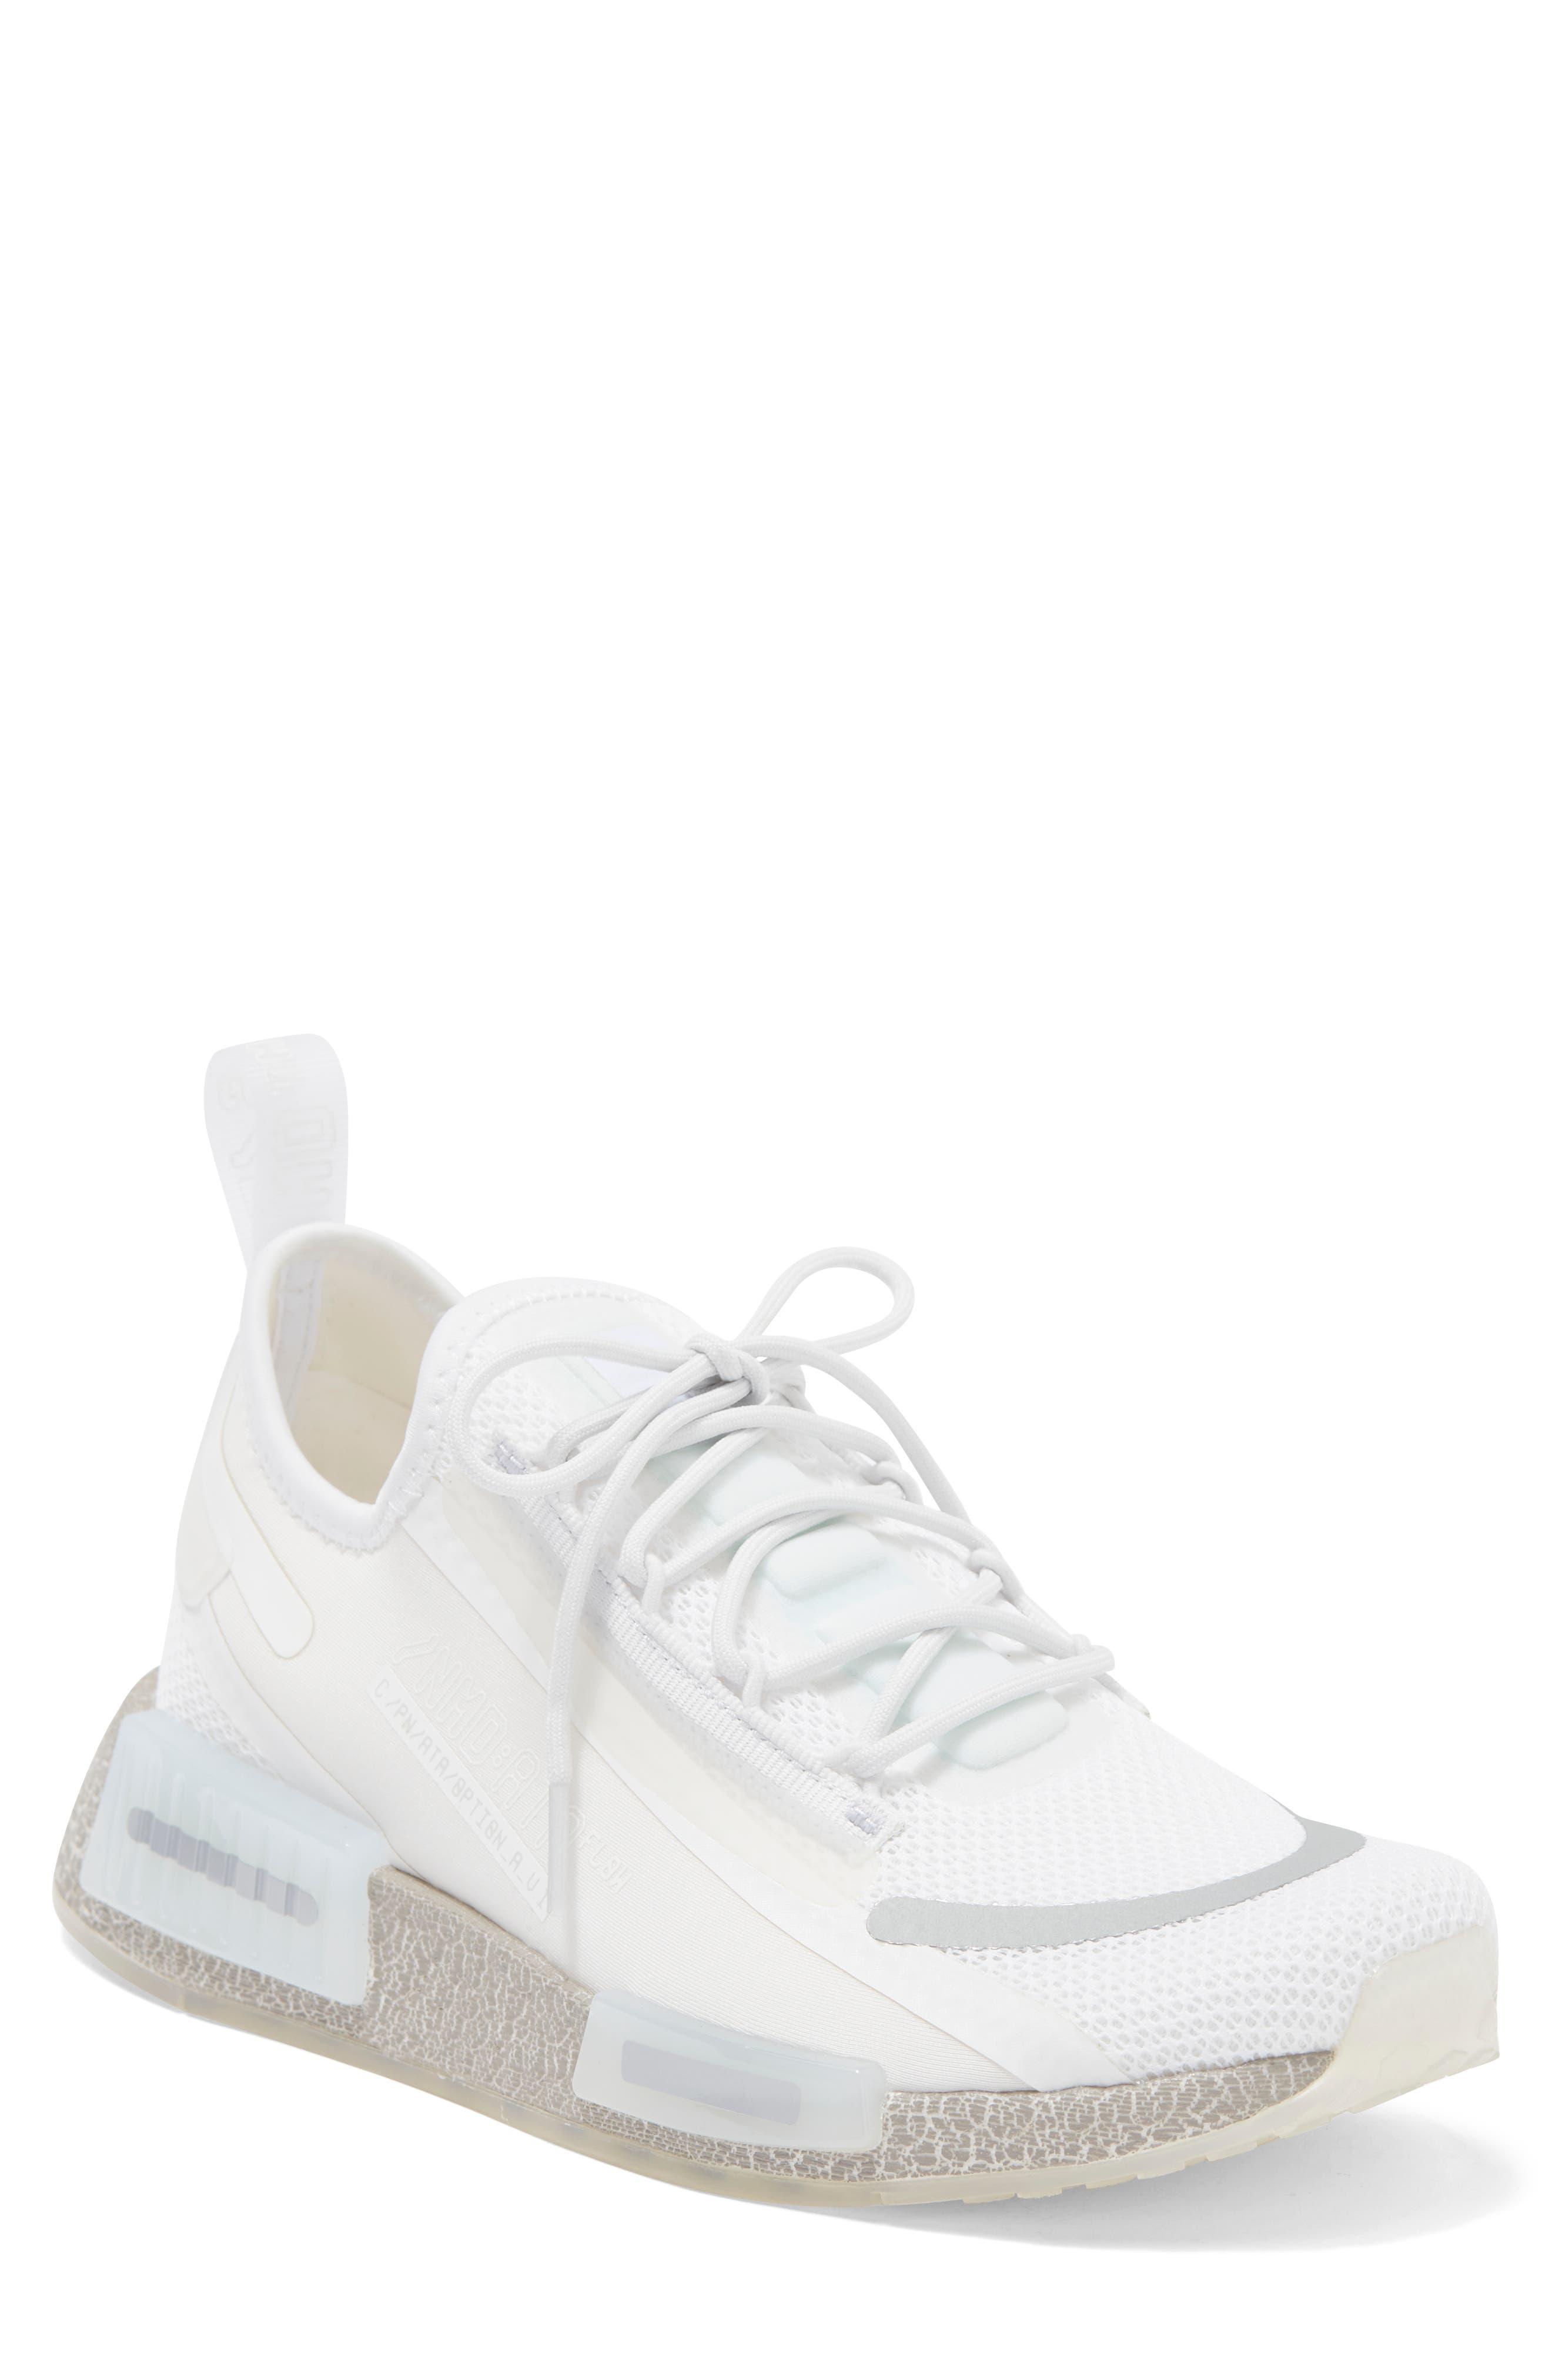 adidas Nmd R1 Spectoo Sneaker In Ftwr White-crystal White At Nordstrom Rack  for Men | Lyst